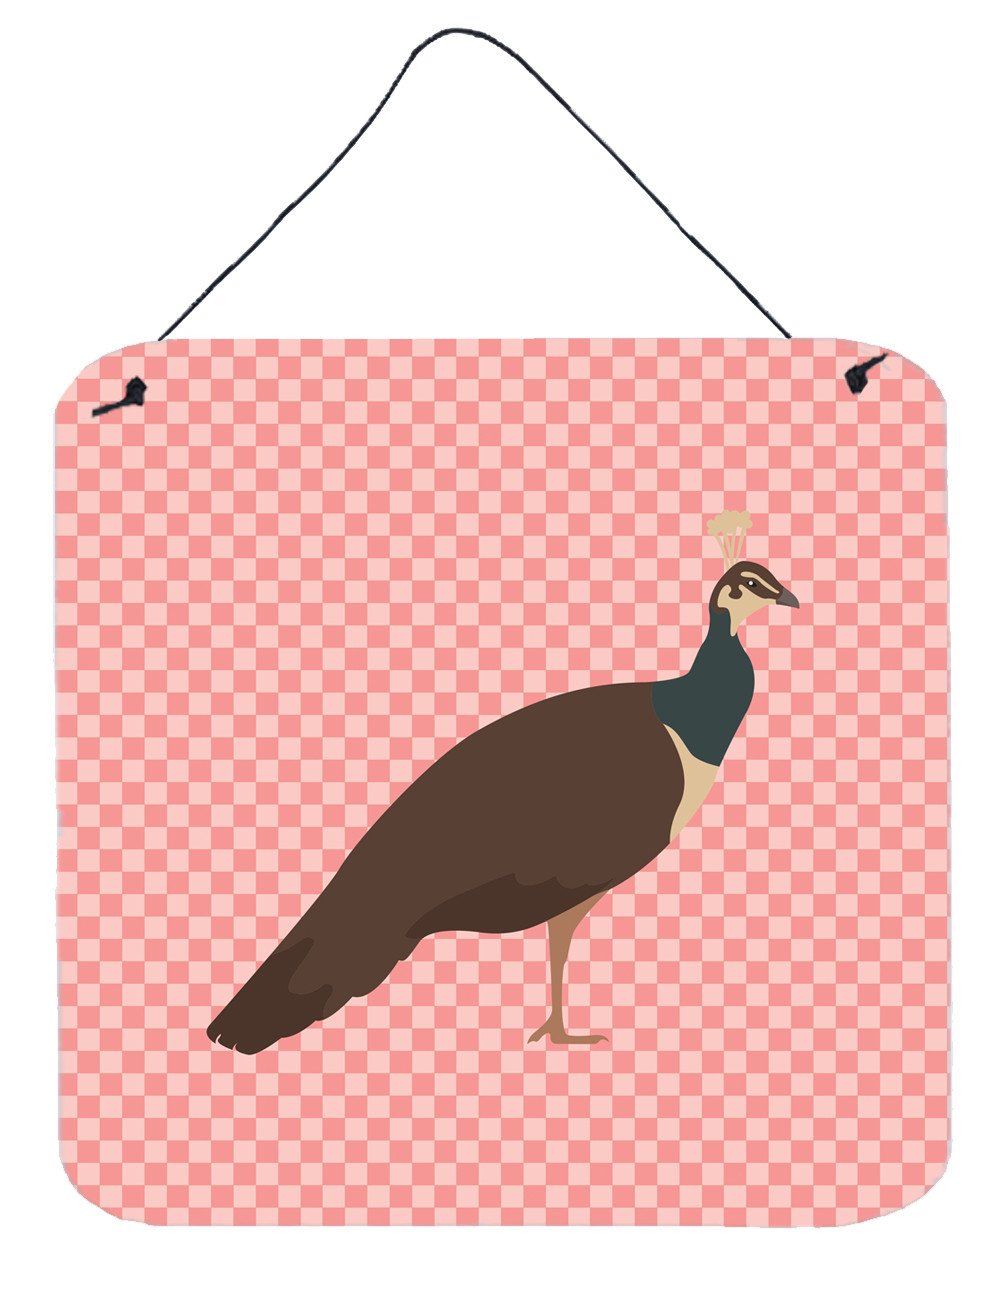 Indian Peahen Peafowl Pink Check Wall or Door Hanging Prints BB7927DS66 by Caroline's Treasures